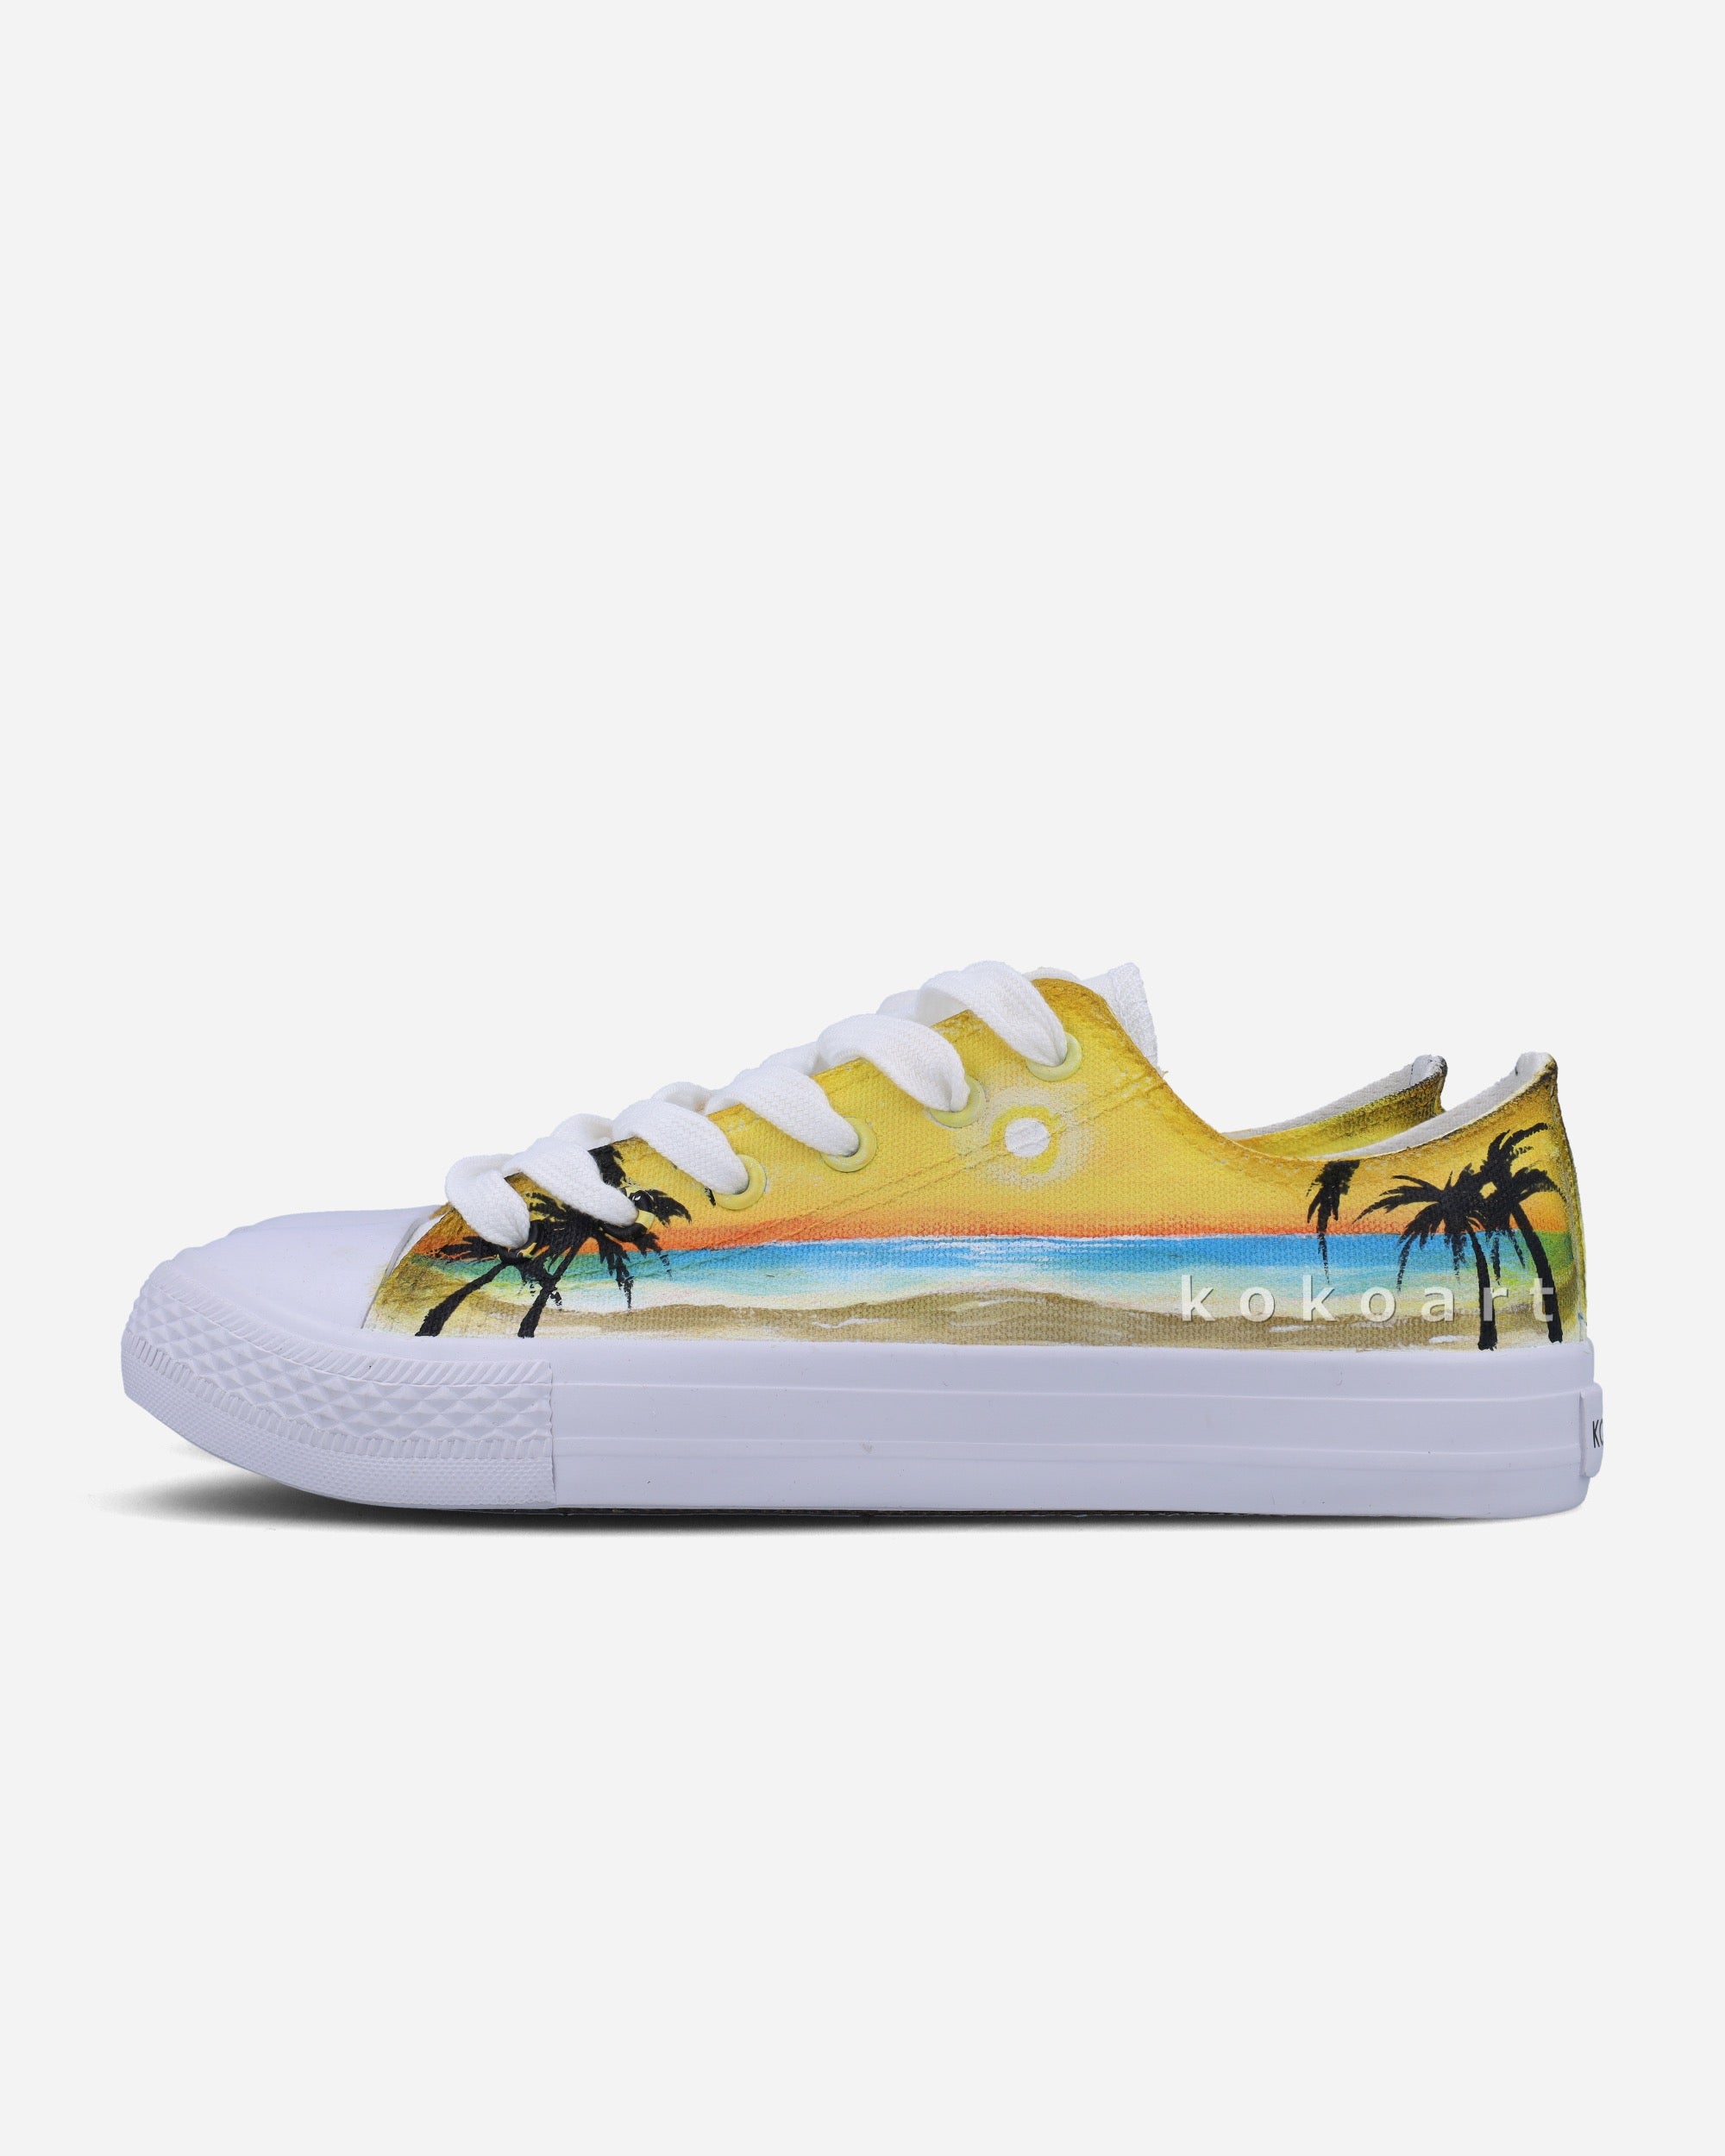 Sunset Beach with Palm Trees Hand Painted Shoes - KOKO ART